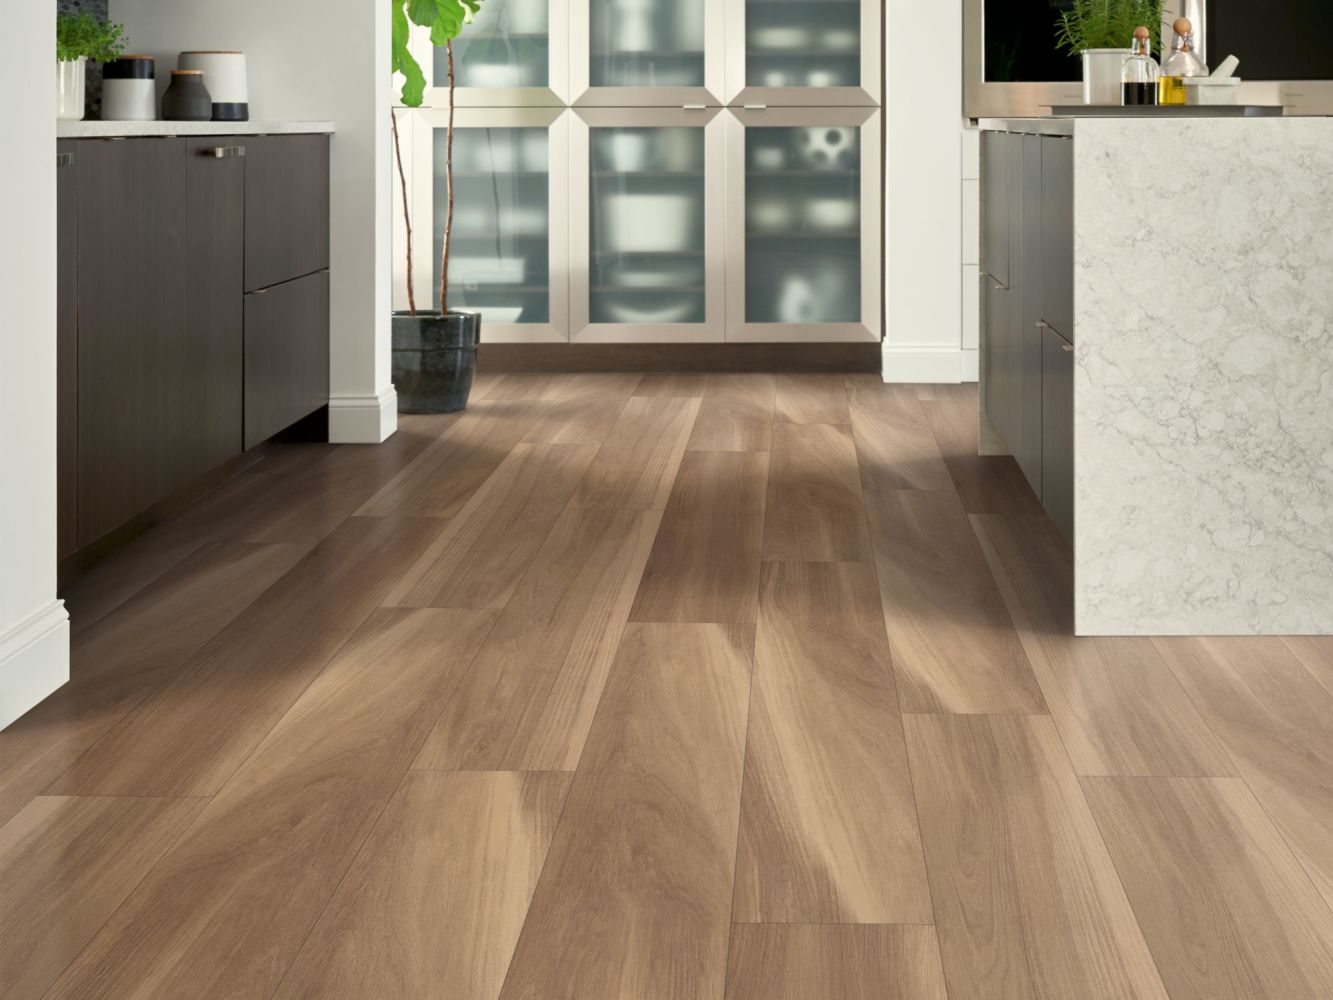 Shaw Floors Resilient Residential Cathedral Oak 720c Plus Buff Oak 07058_0866V